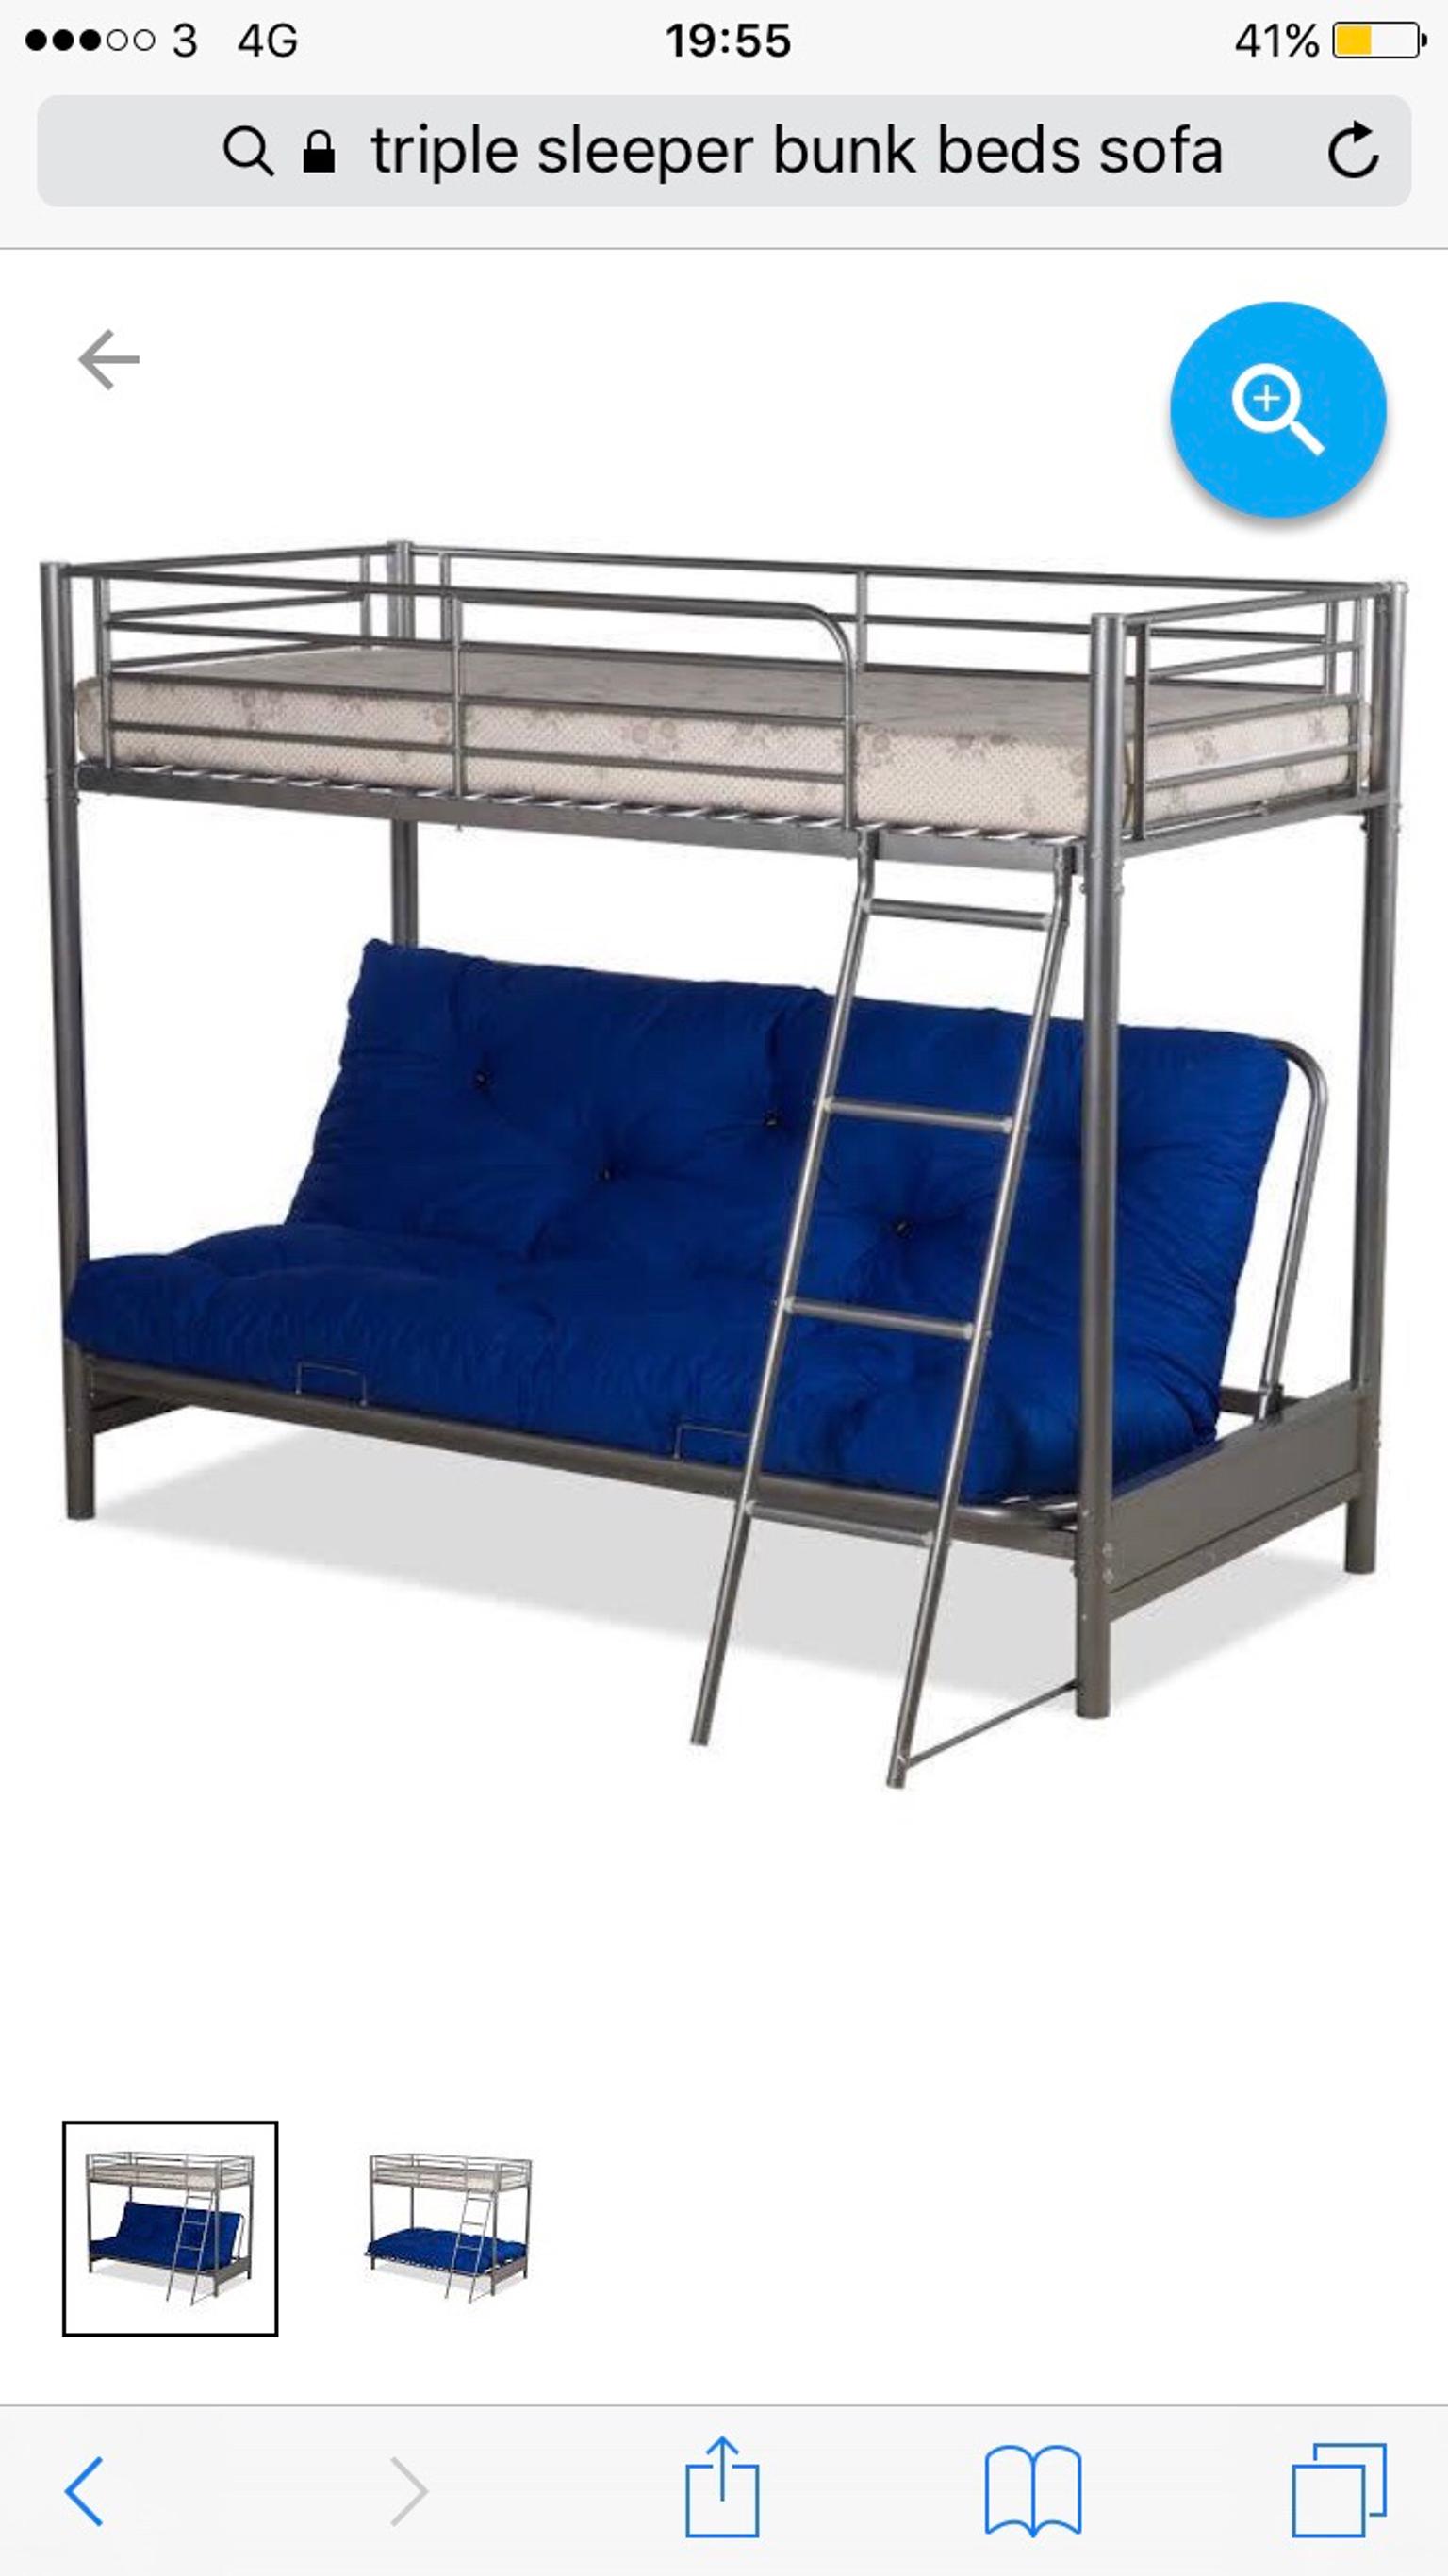 second hand childrens beds